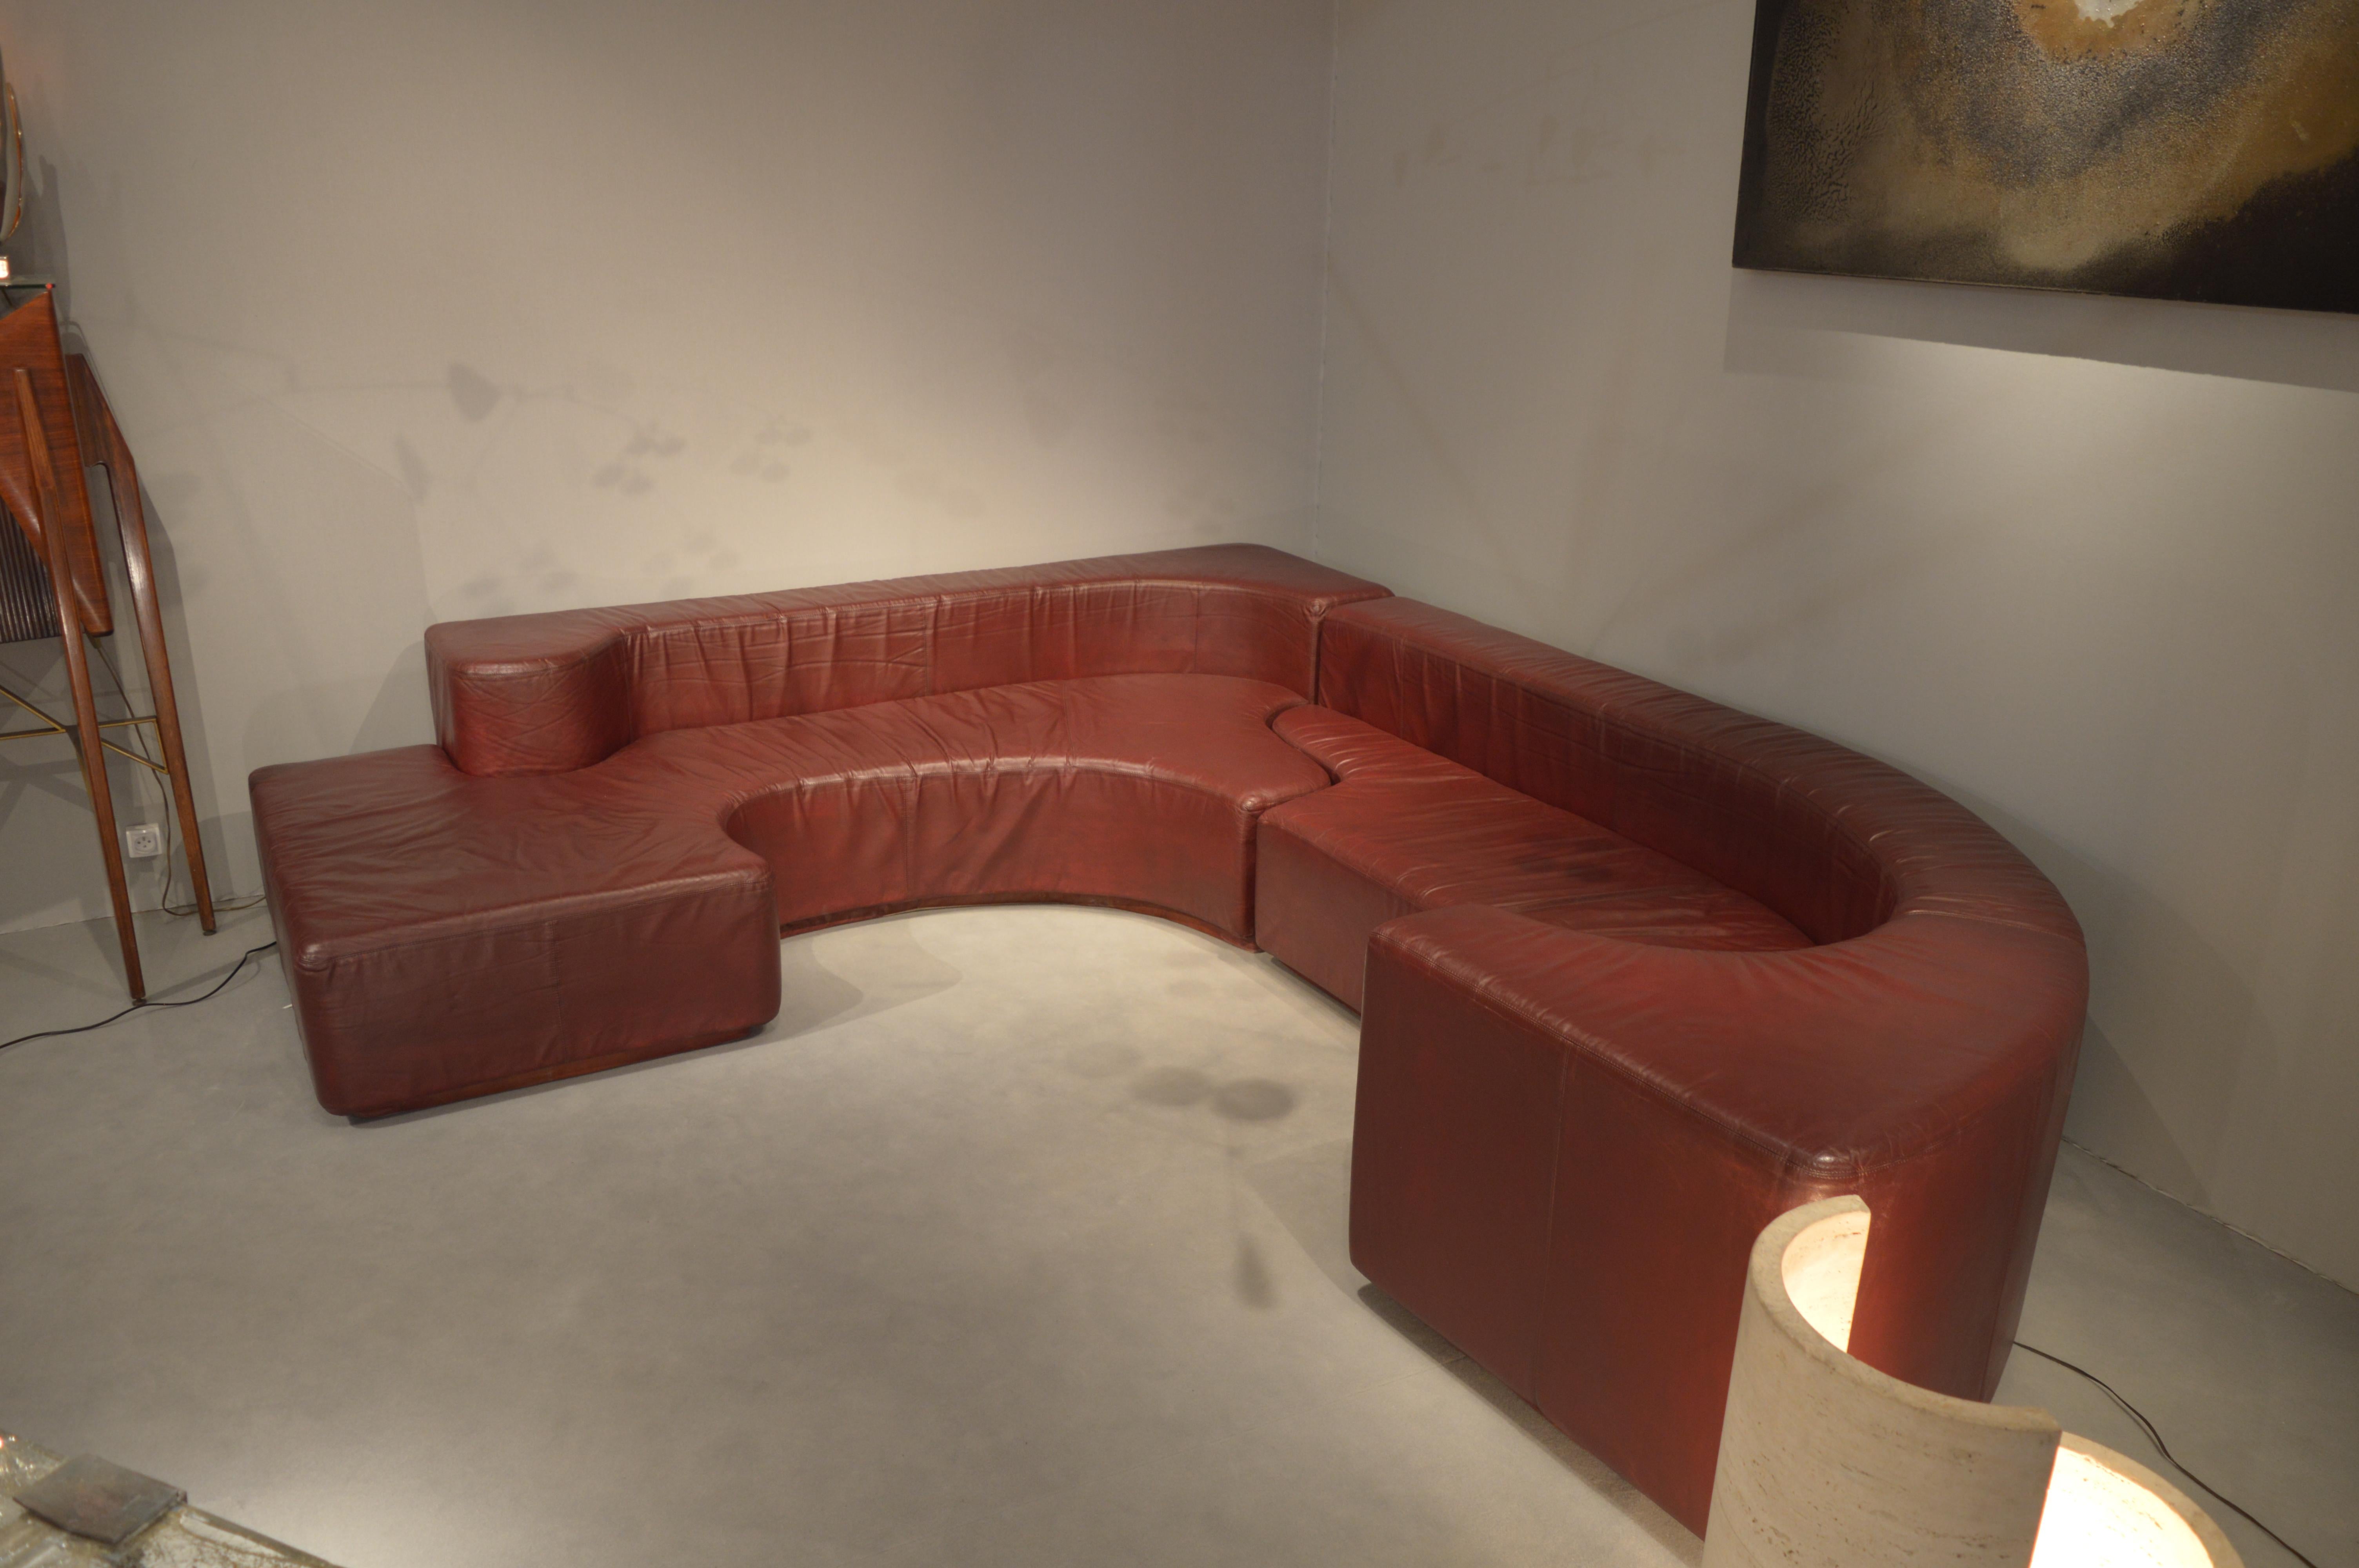 Sofa Lara by Roberto Pamio, Renato Toso & Noti Massari for Stilwood
Rare version in red bordeaux leather. Excellent conditions.
Very comfortable sofa, you can separate it in two parts.
Italian work, circa 1960.